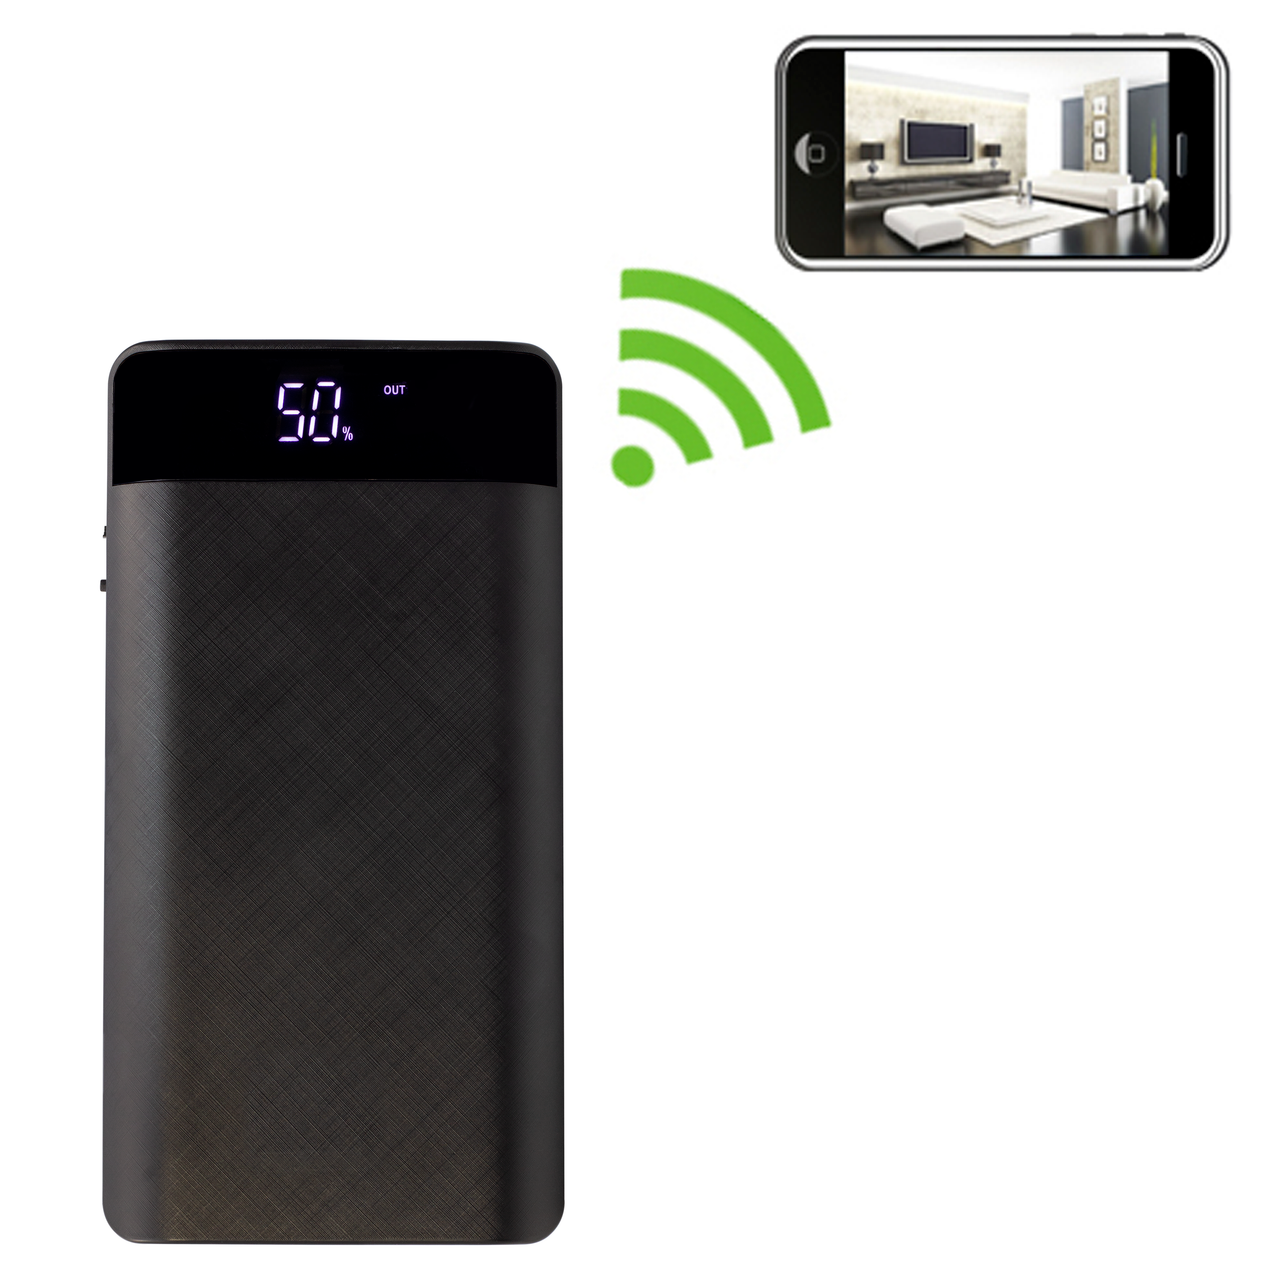 Power Bank Hidden Camera with Build-in DVR and WiFi Remote Viewing from Android and iPhones